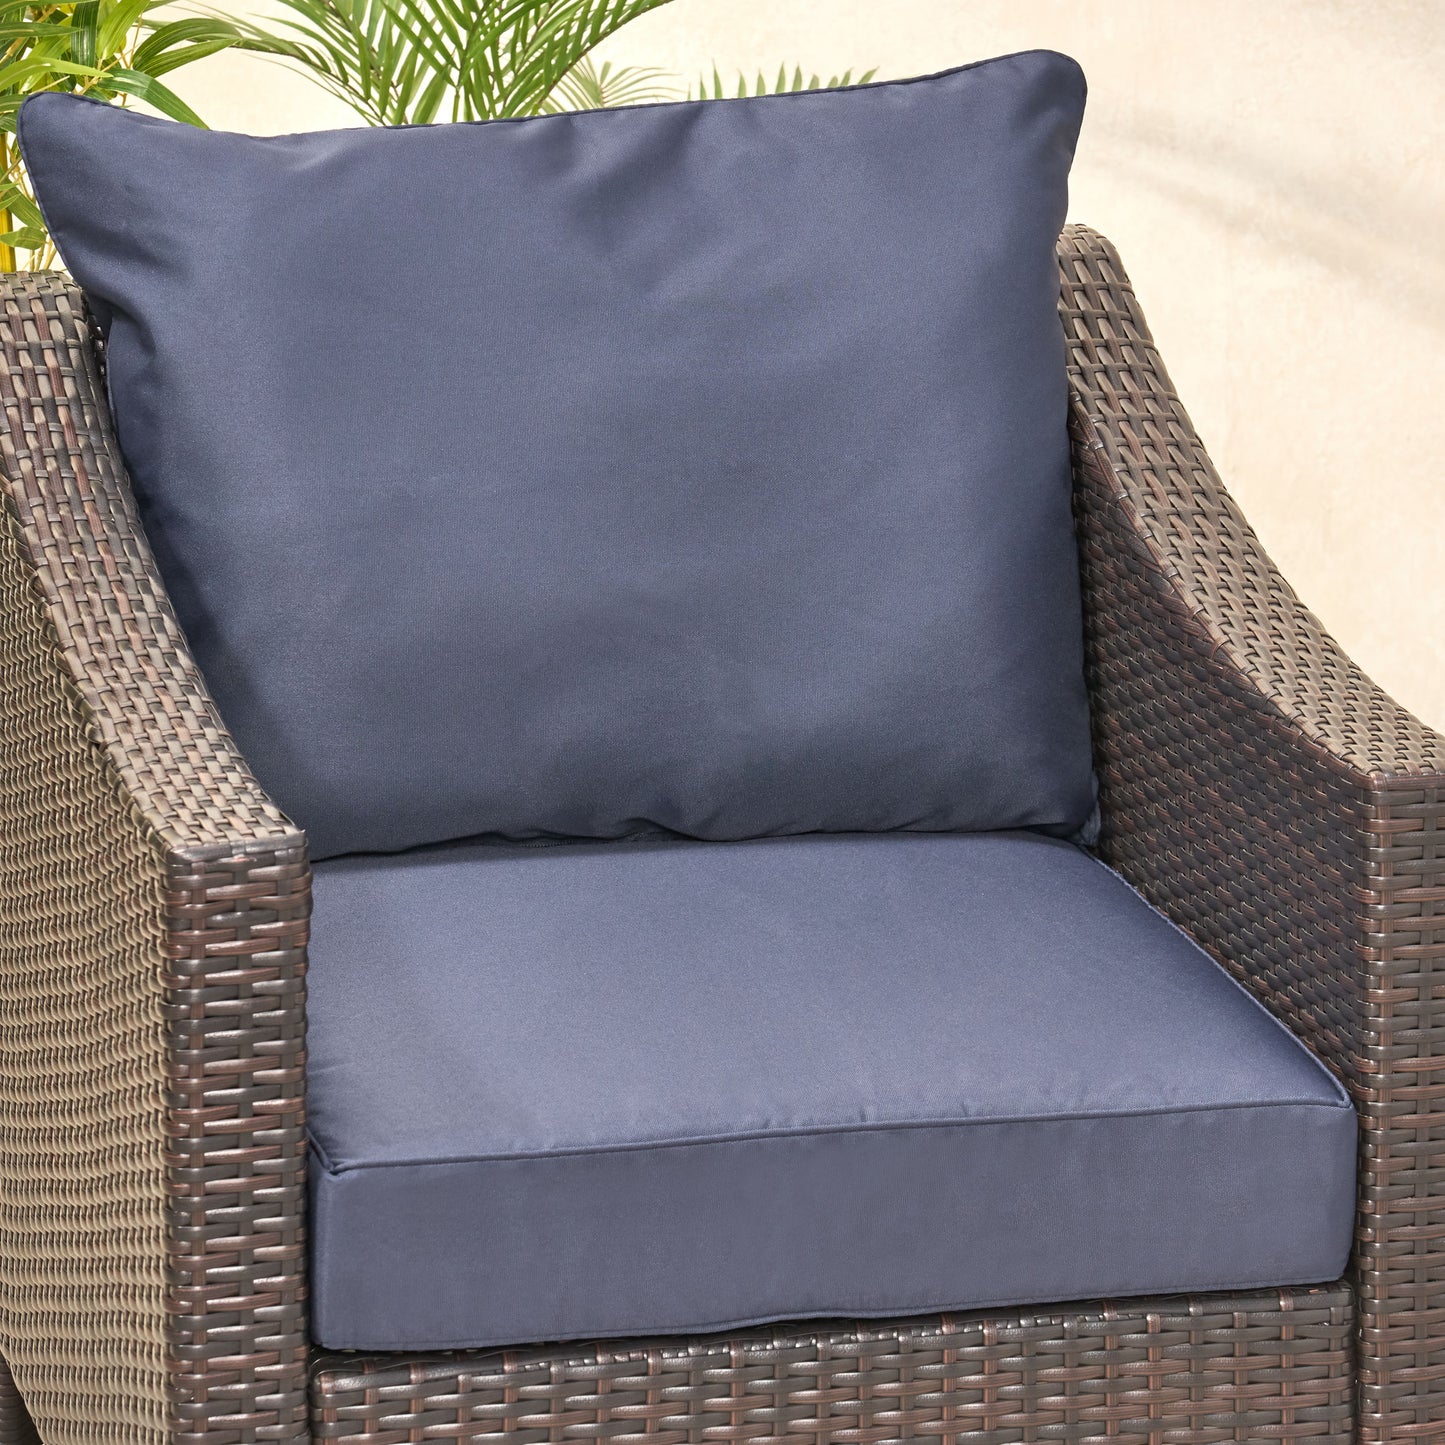 Luciella Outdoor Water Resistant Fabric Club Chair Cushions with Piping